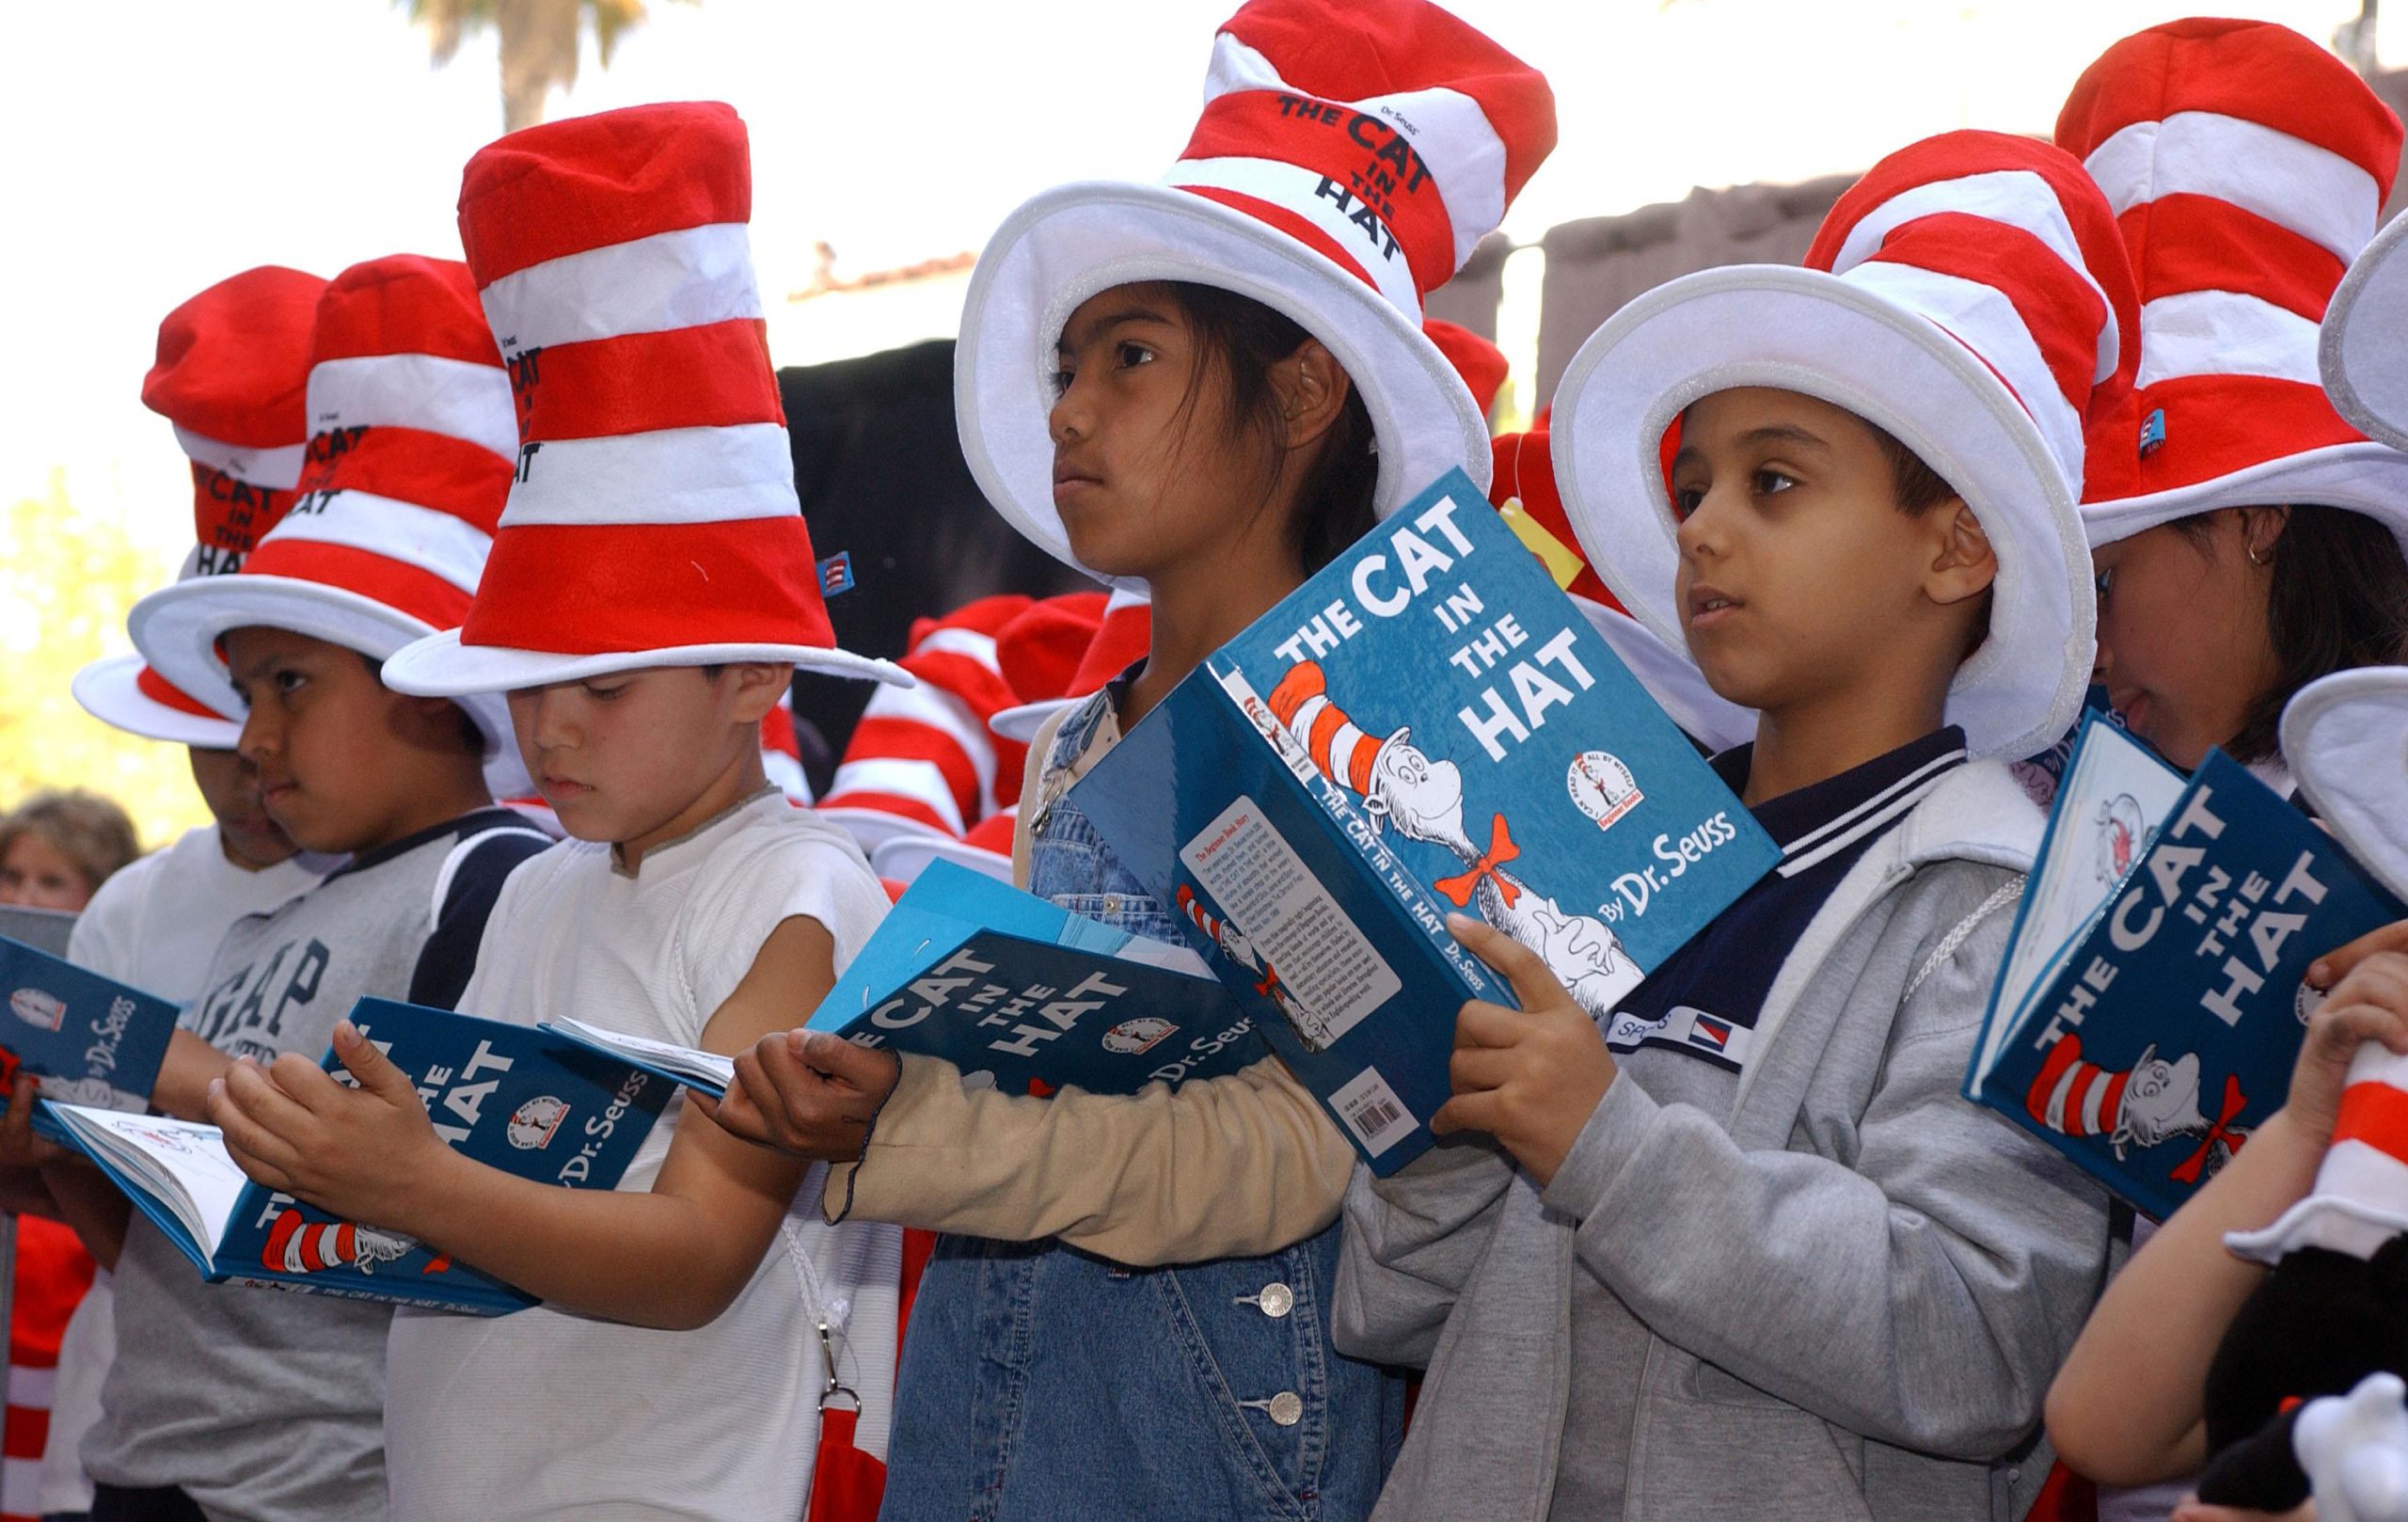 Kids dressed as Dr. Seuss characters with books in hand